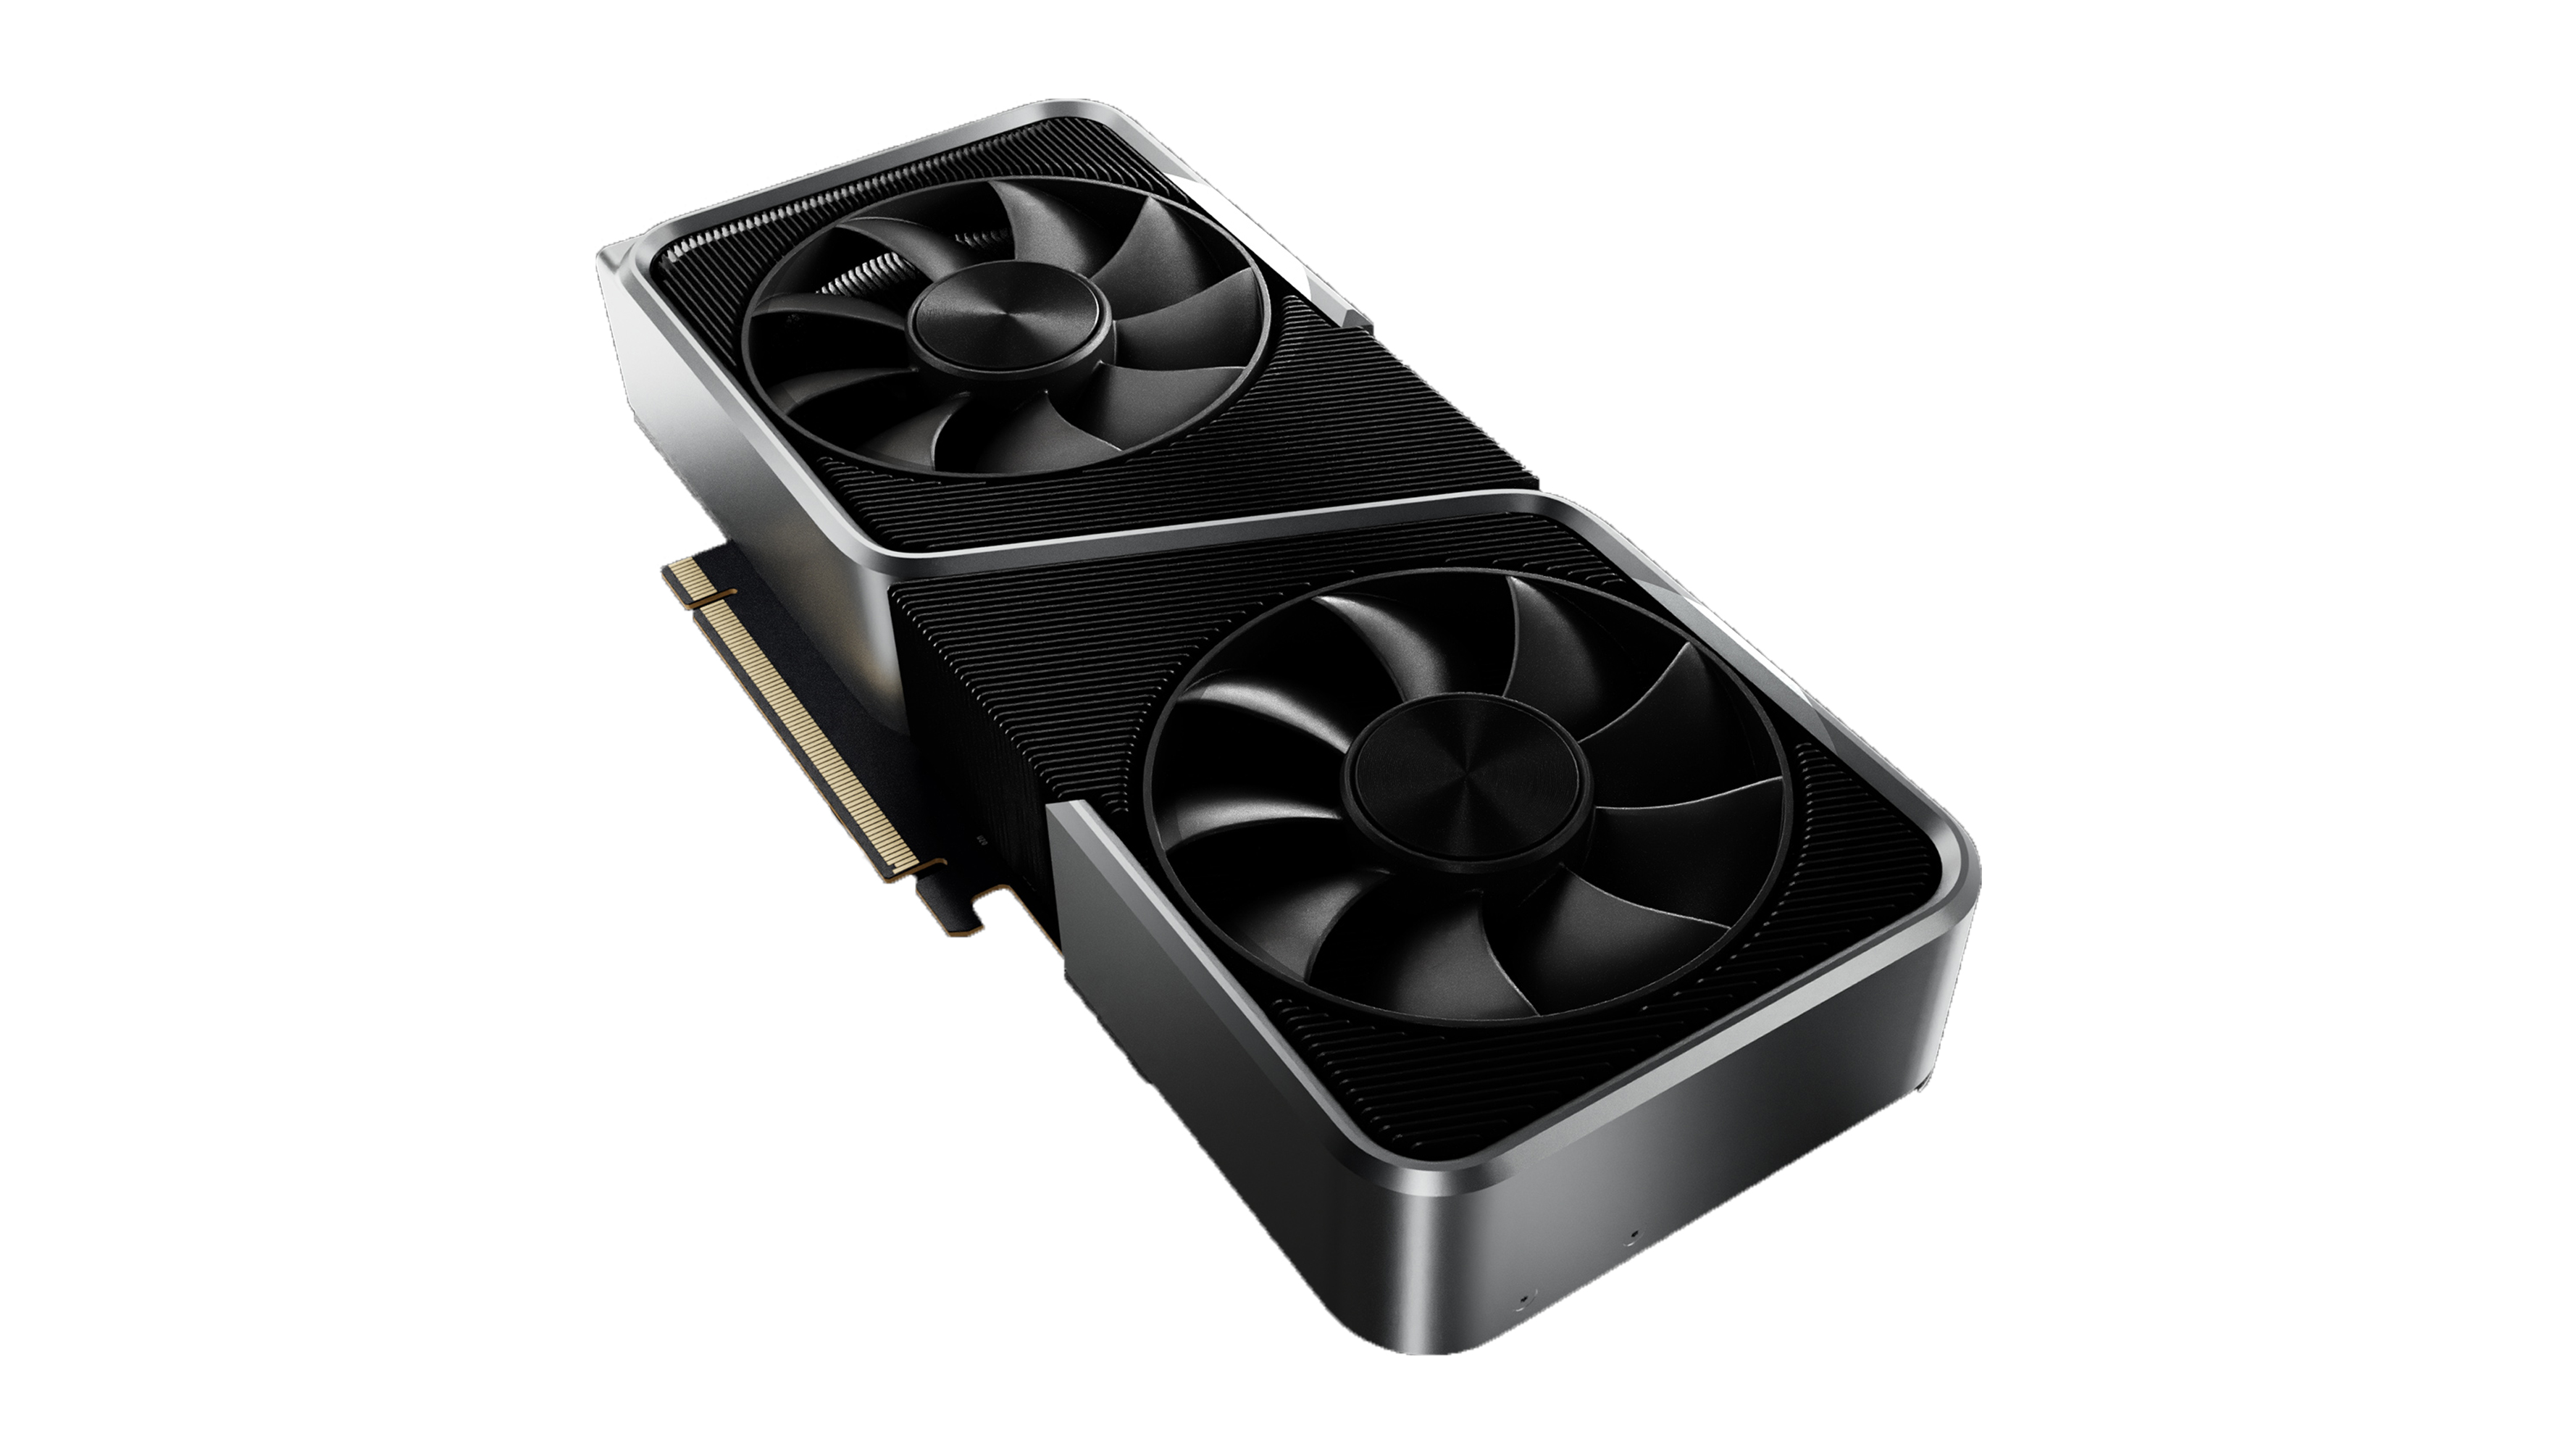 Nvidia GeForce RTX 3060 shown at an angle